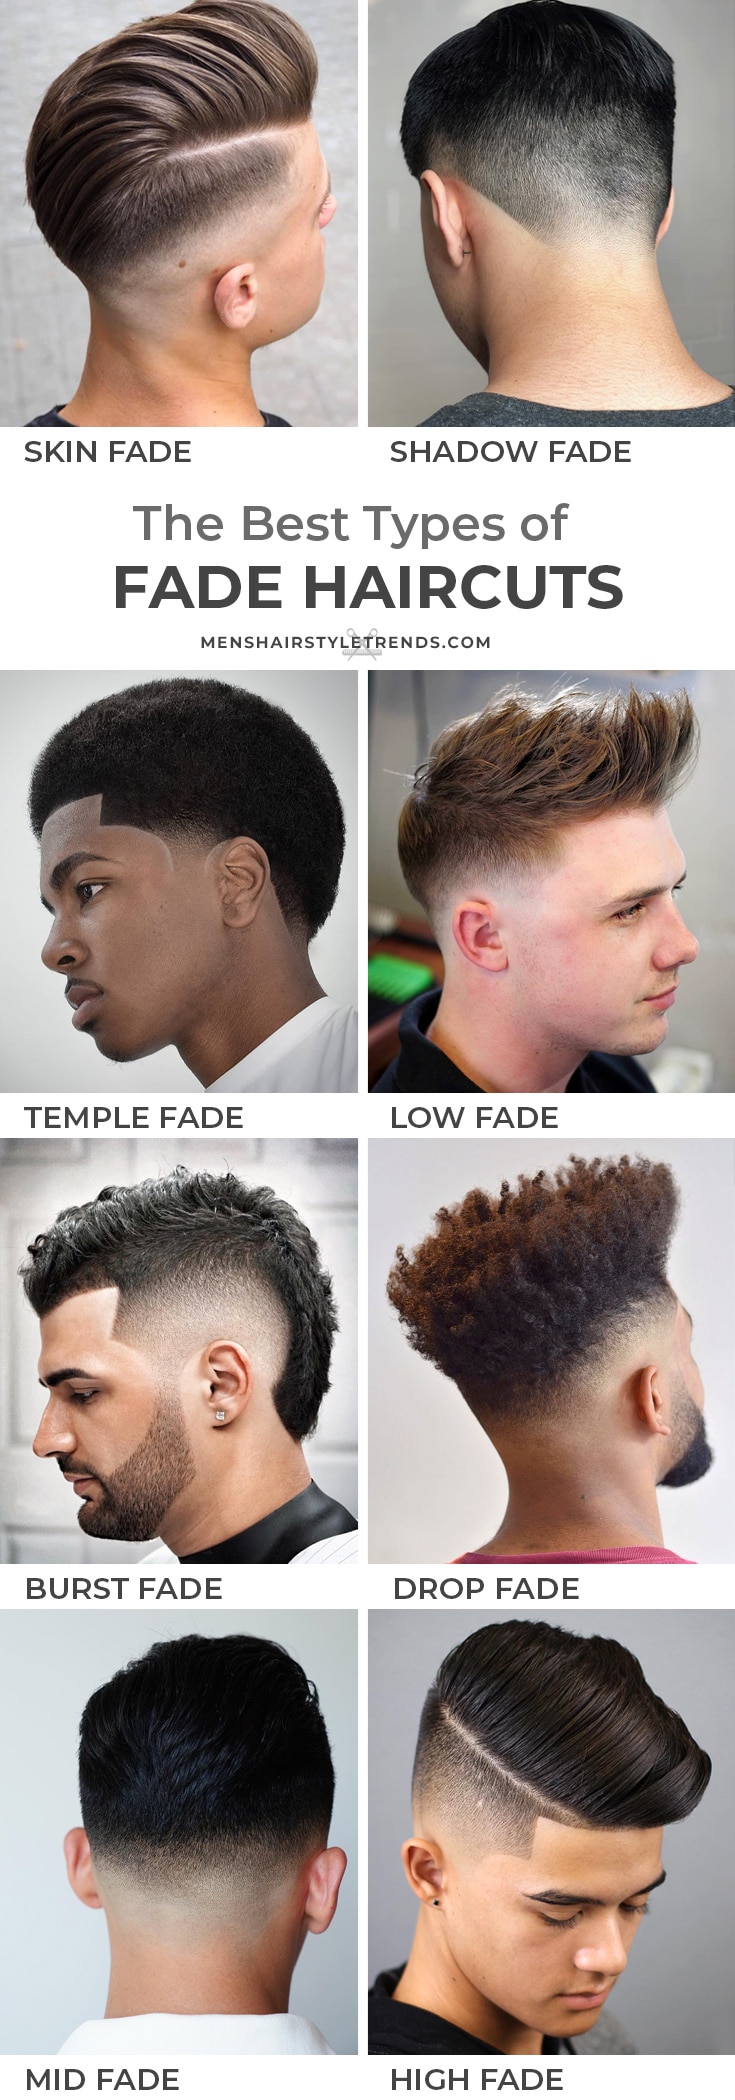 How to ask for a fade